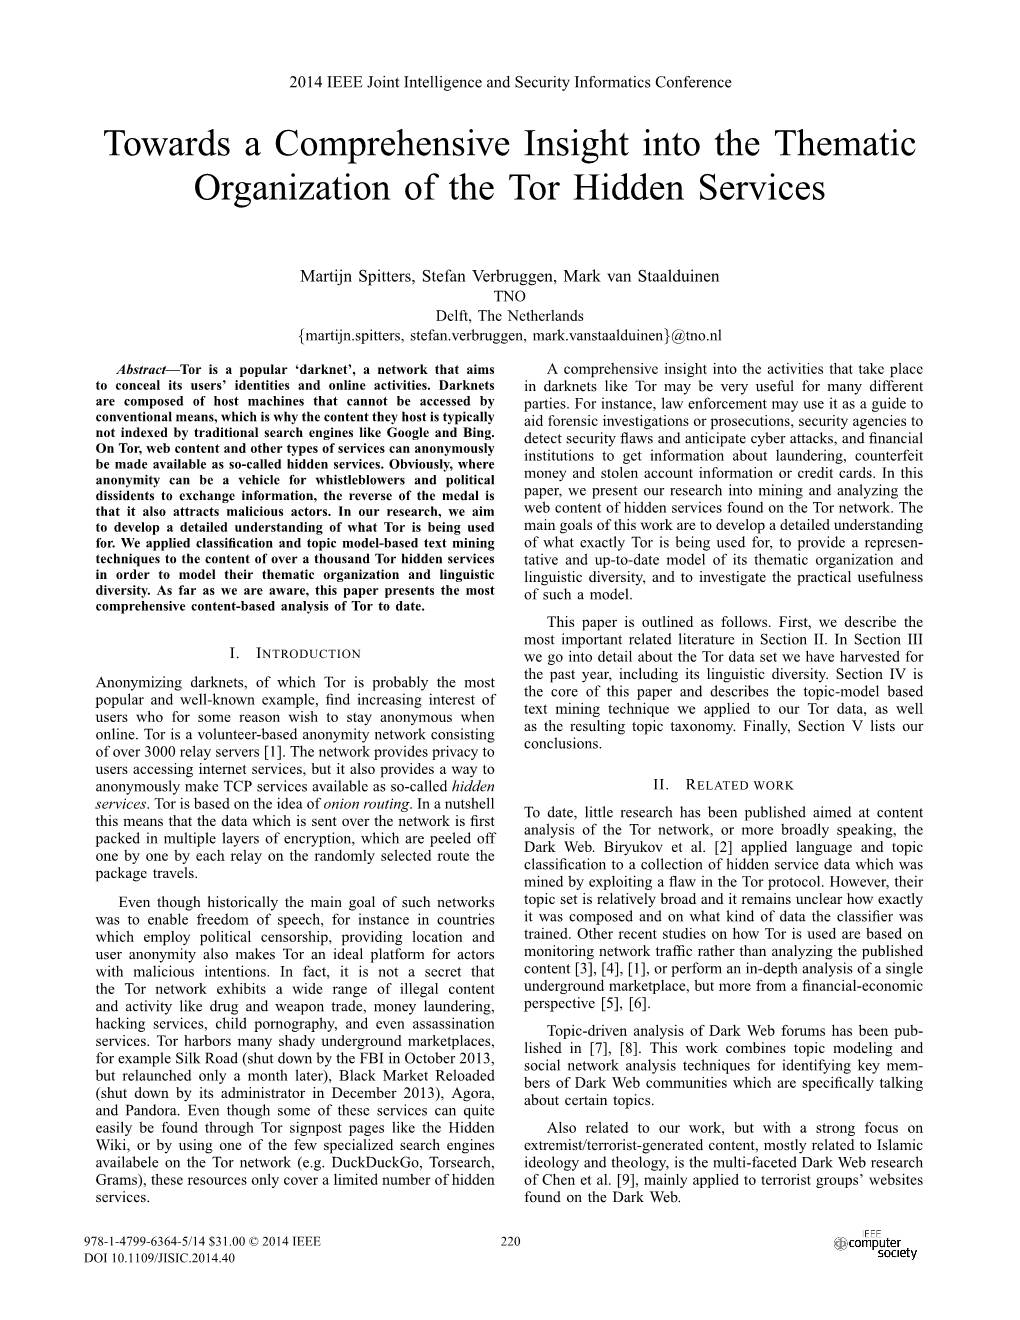 Towards a Comprehensive Insight Into the Thematic Organization of the Tor Hidden Services